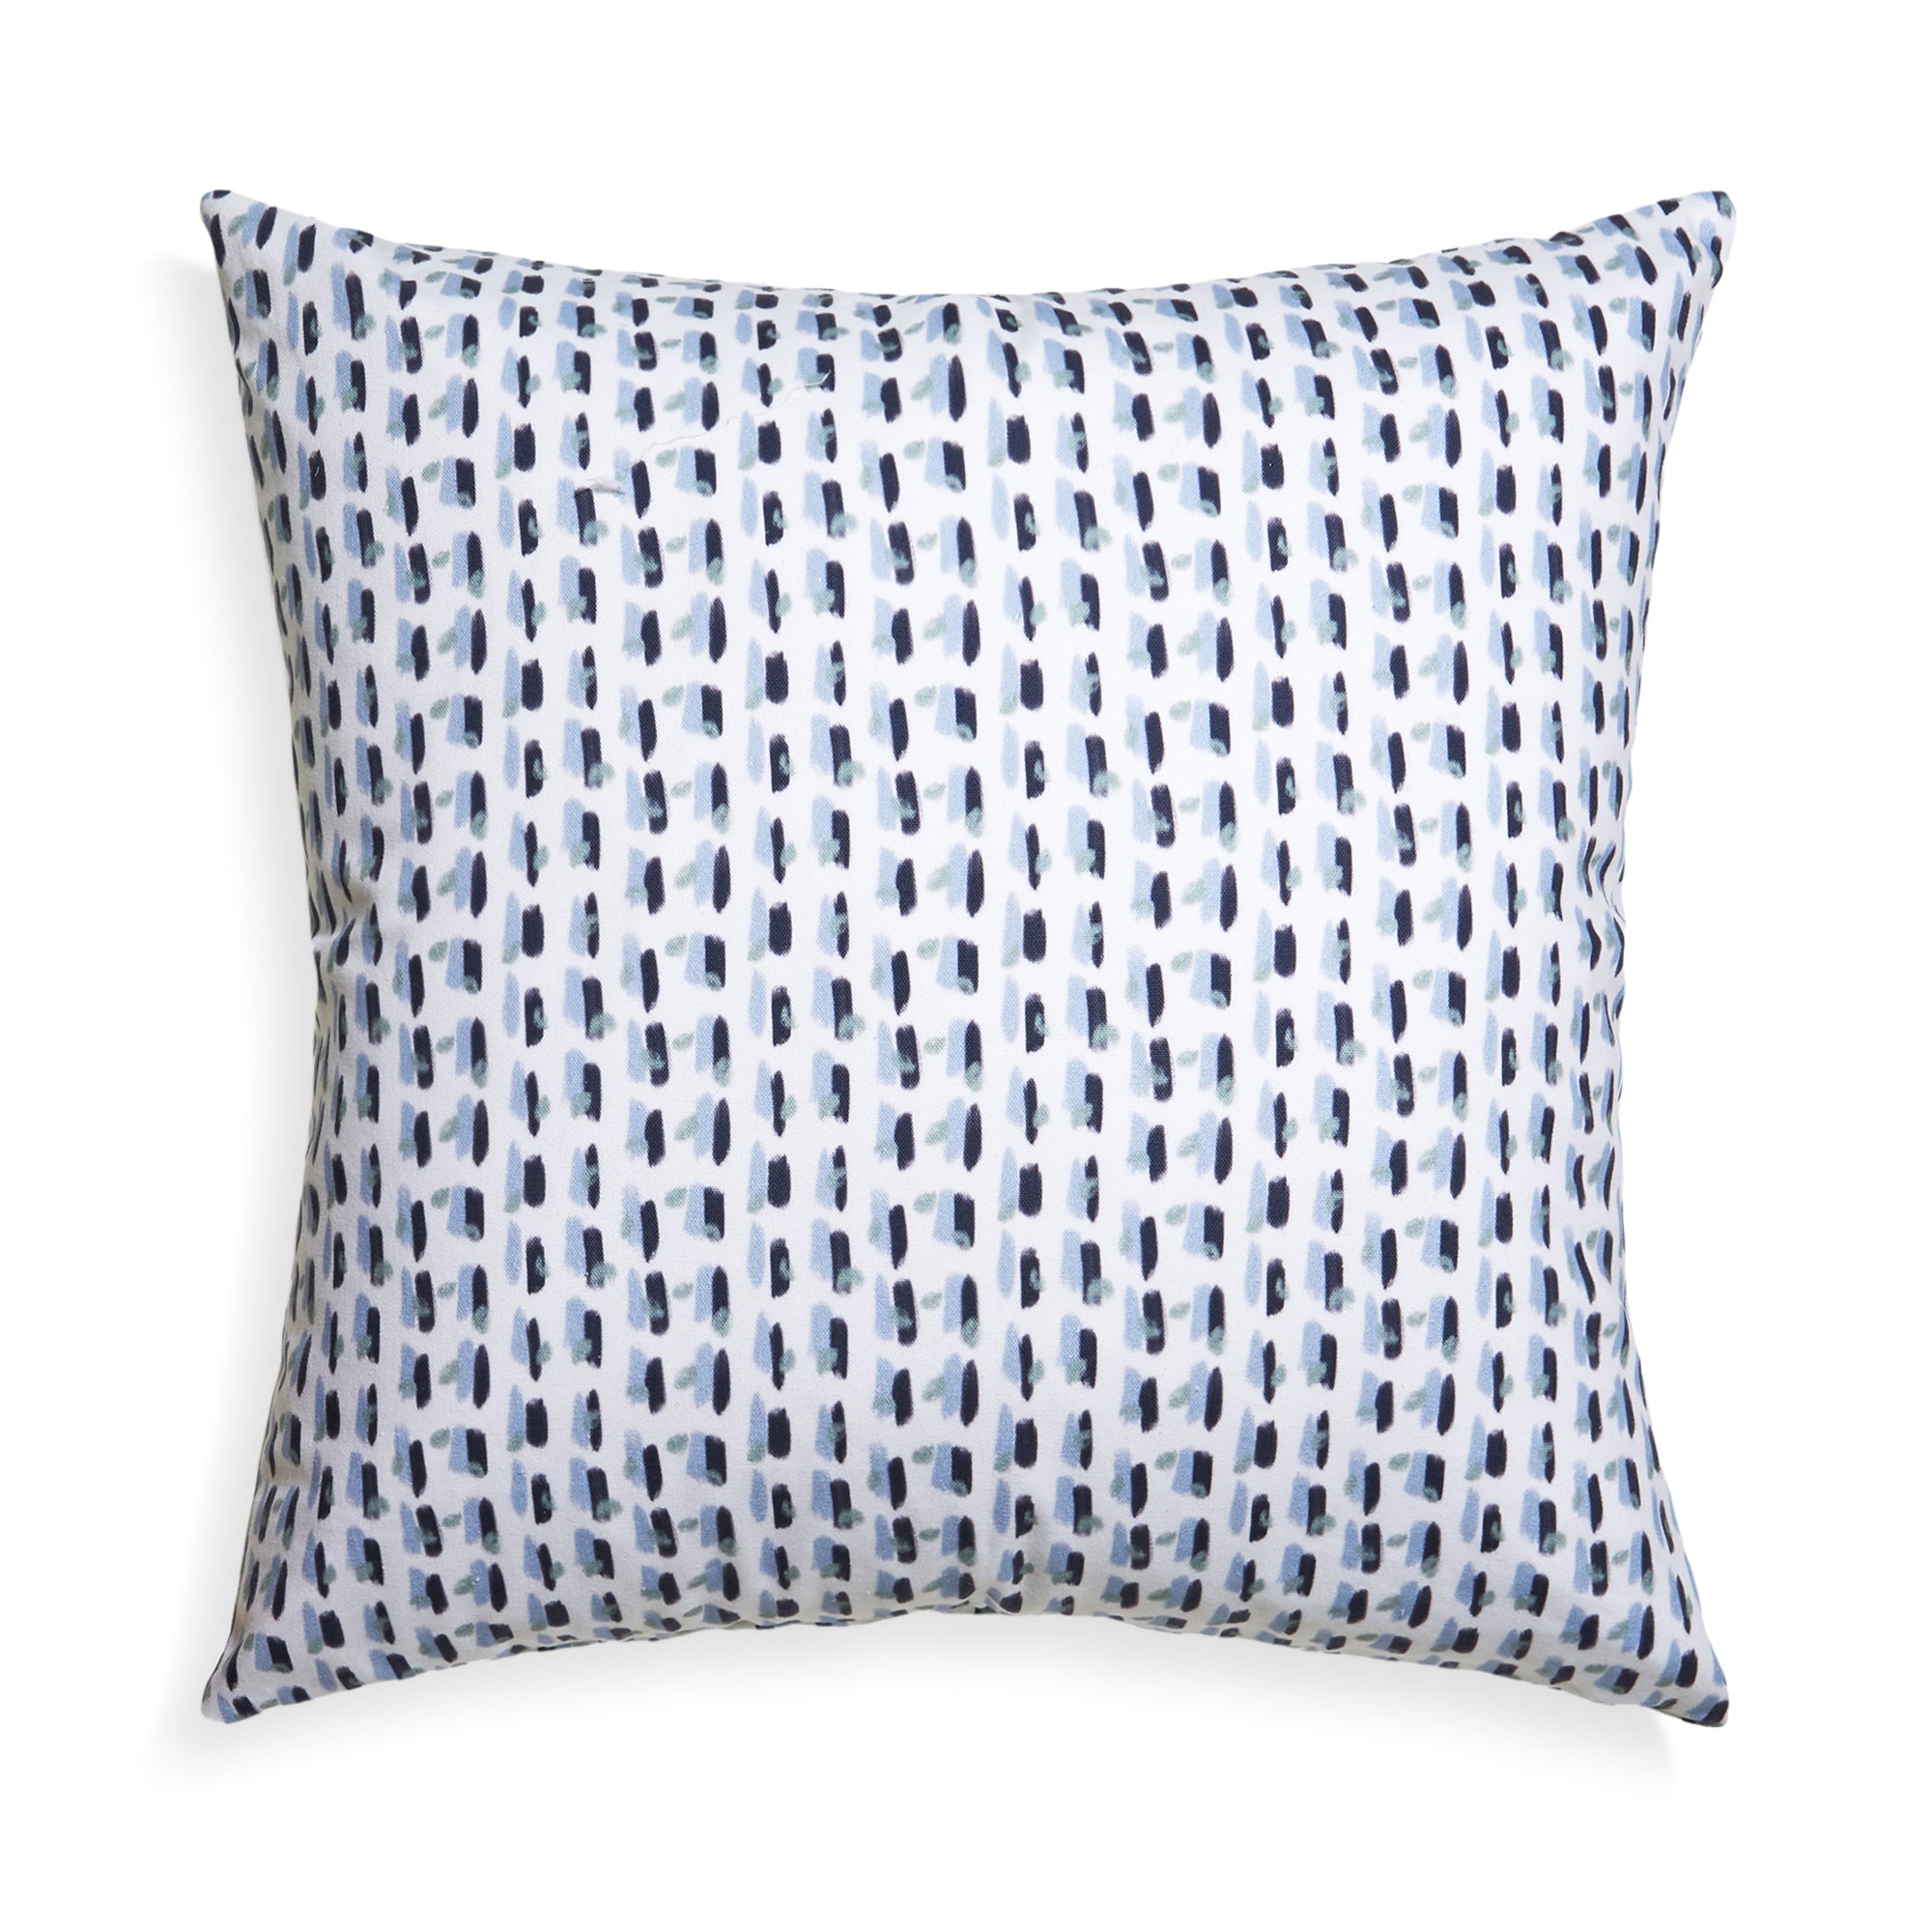 Sky and Navy Blue Poppy Printed Pillow